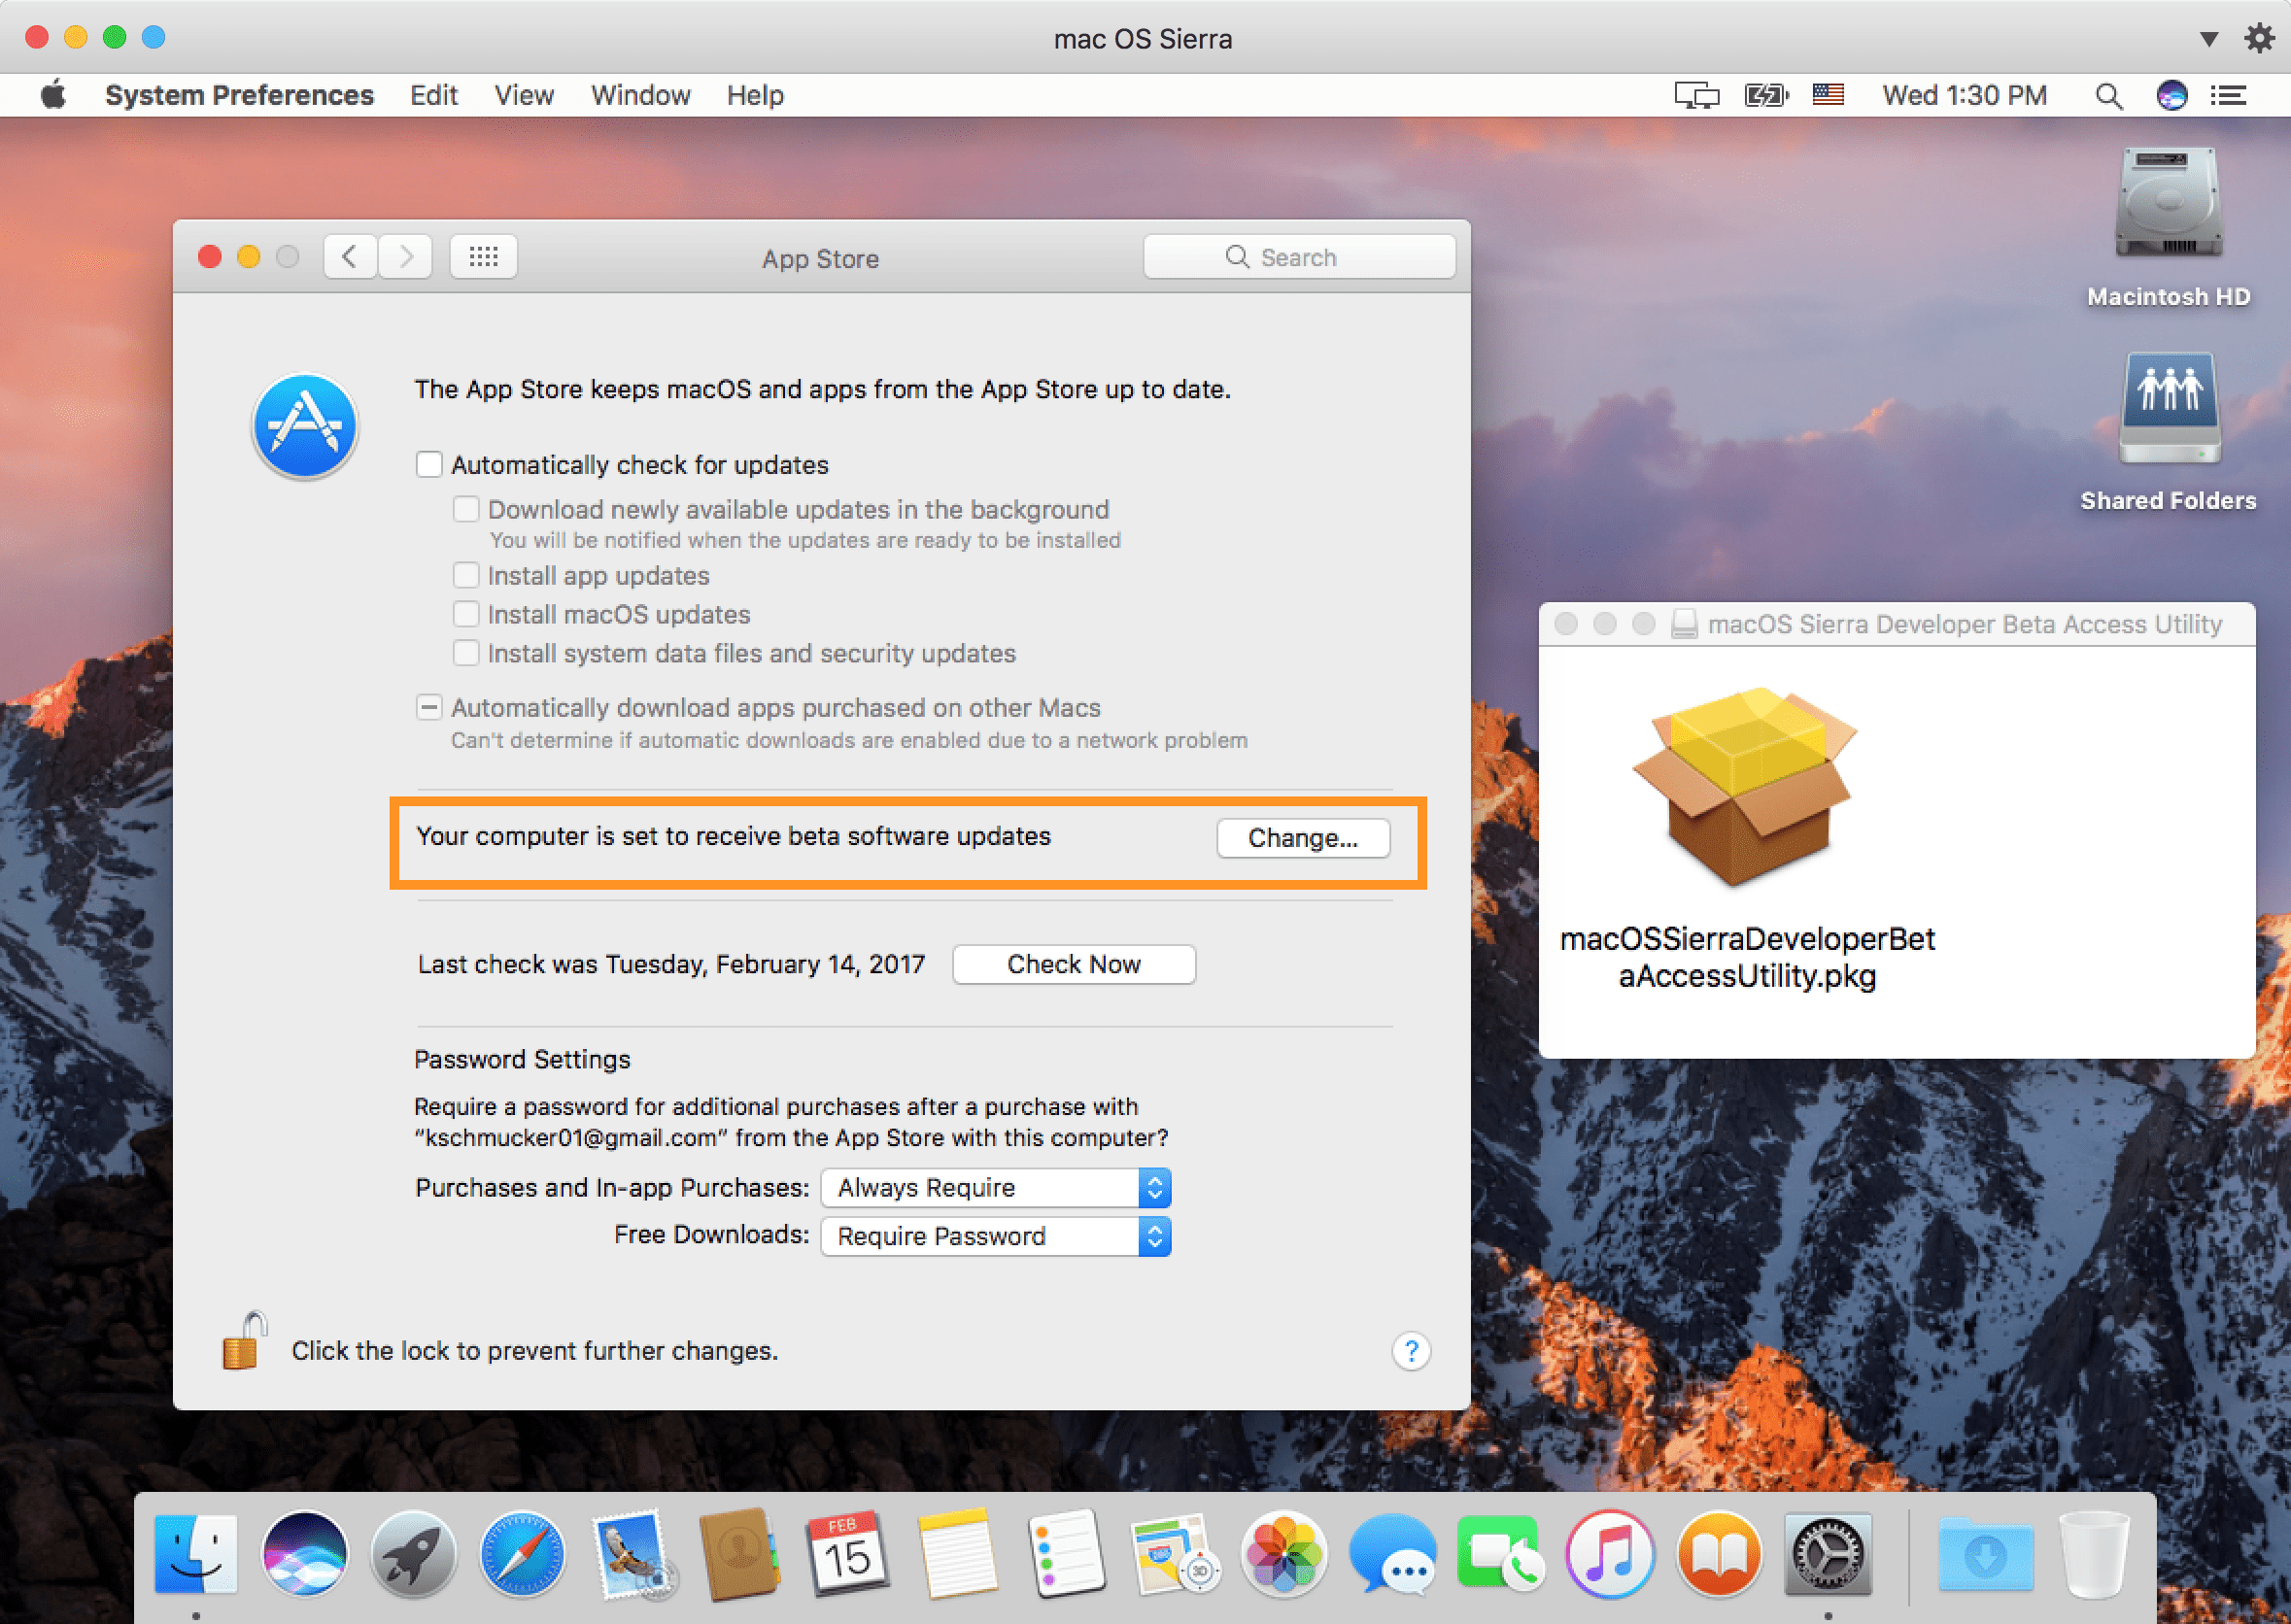 launchpad manager pro crack sierra